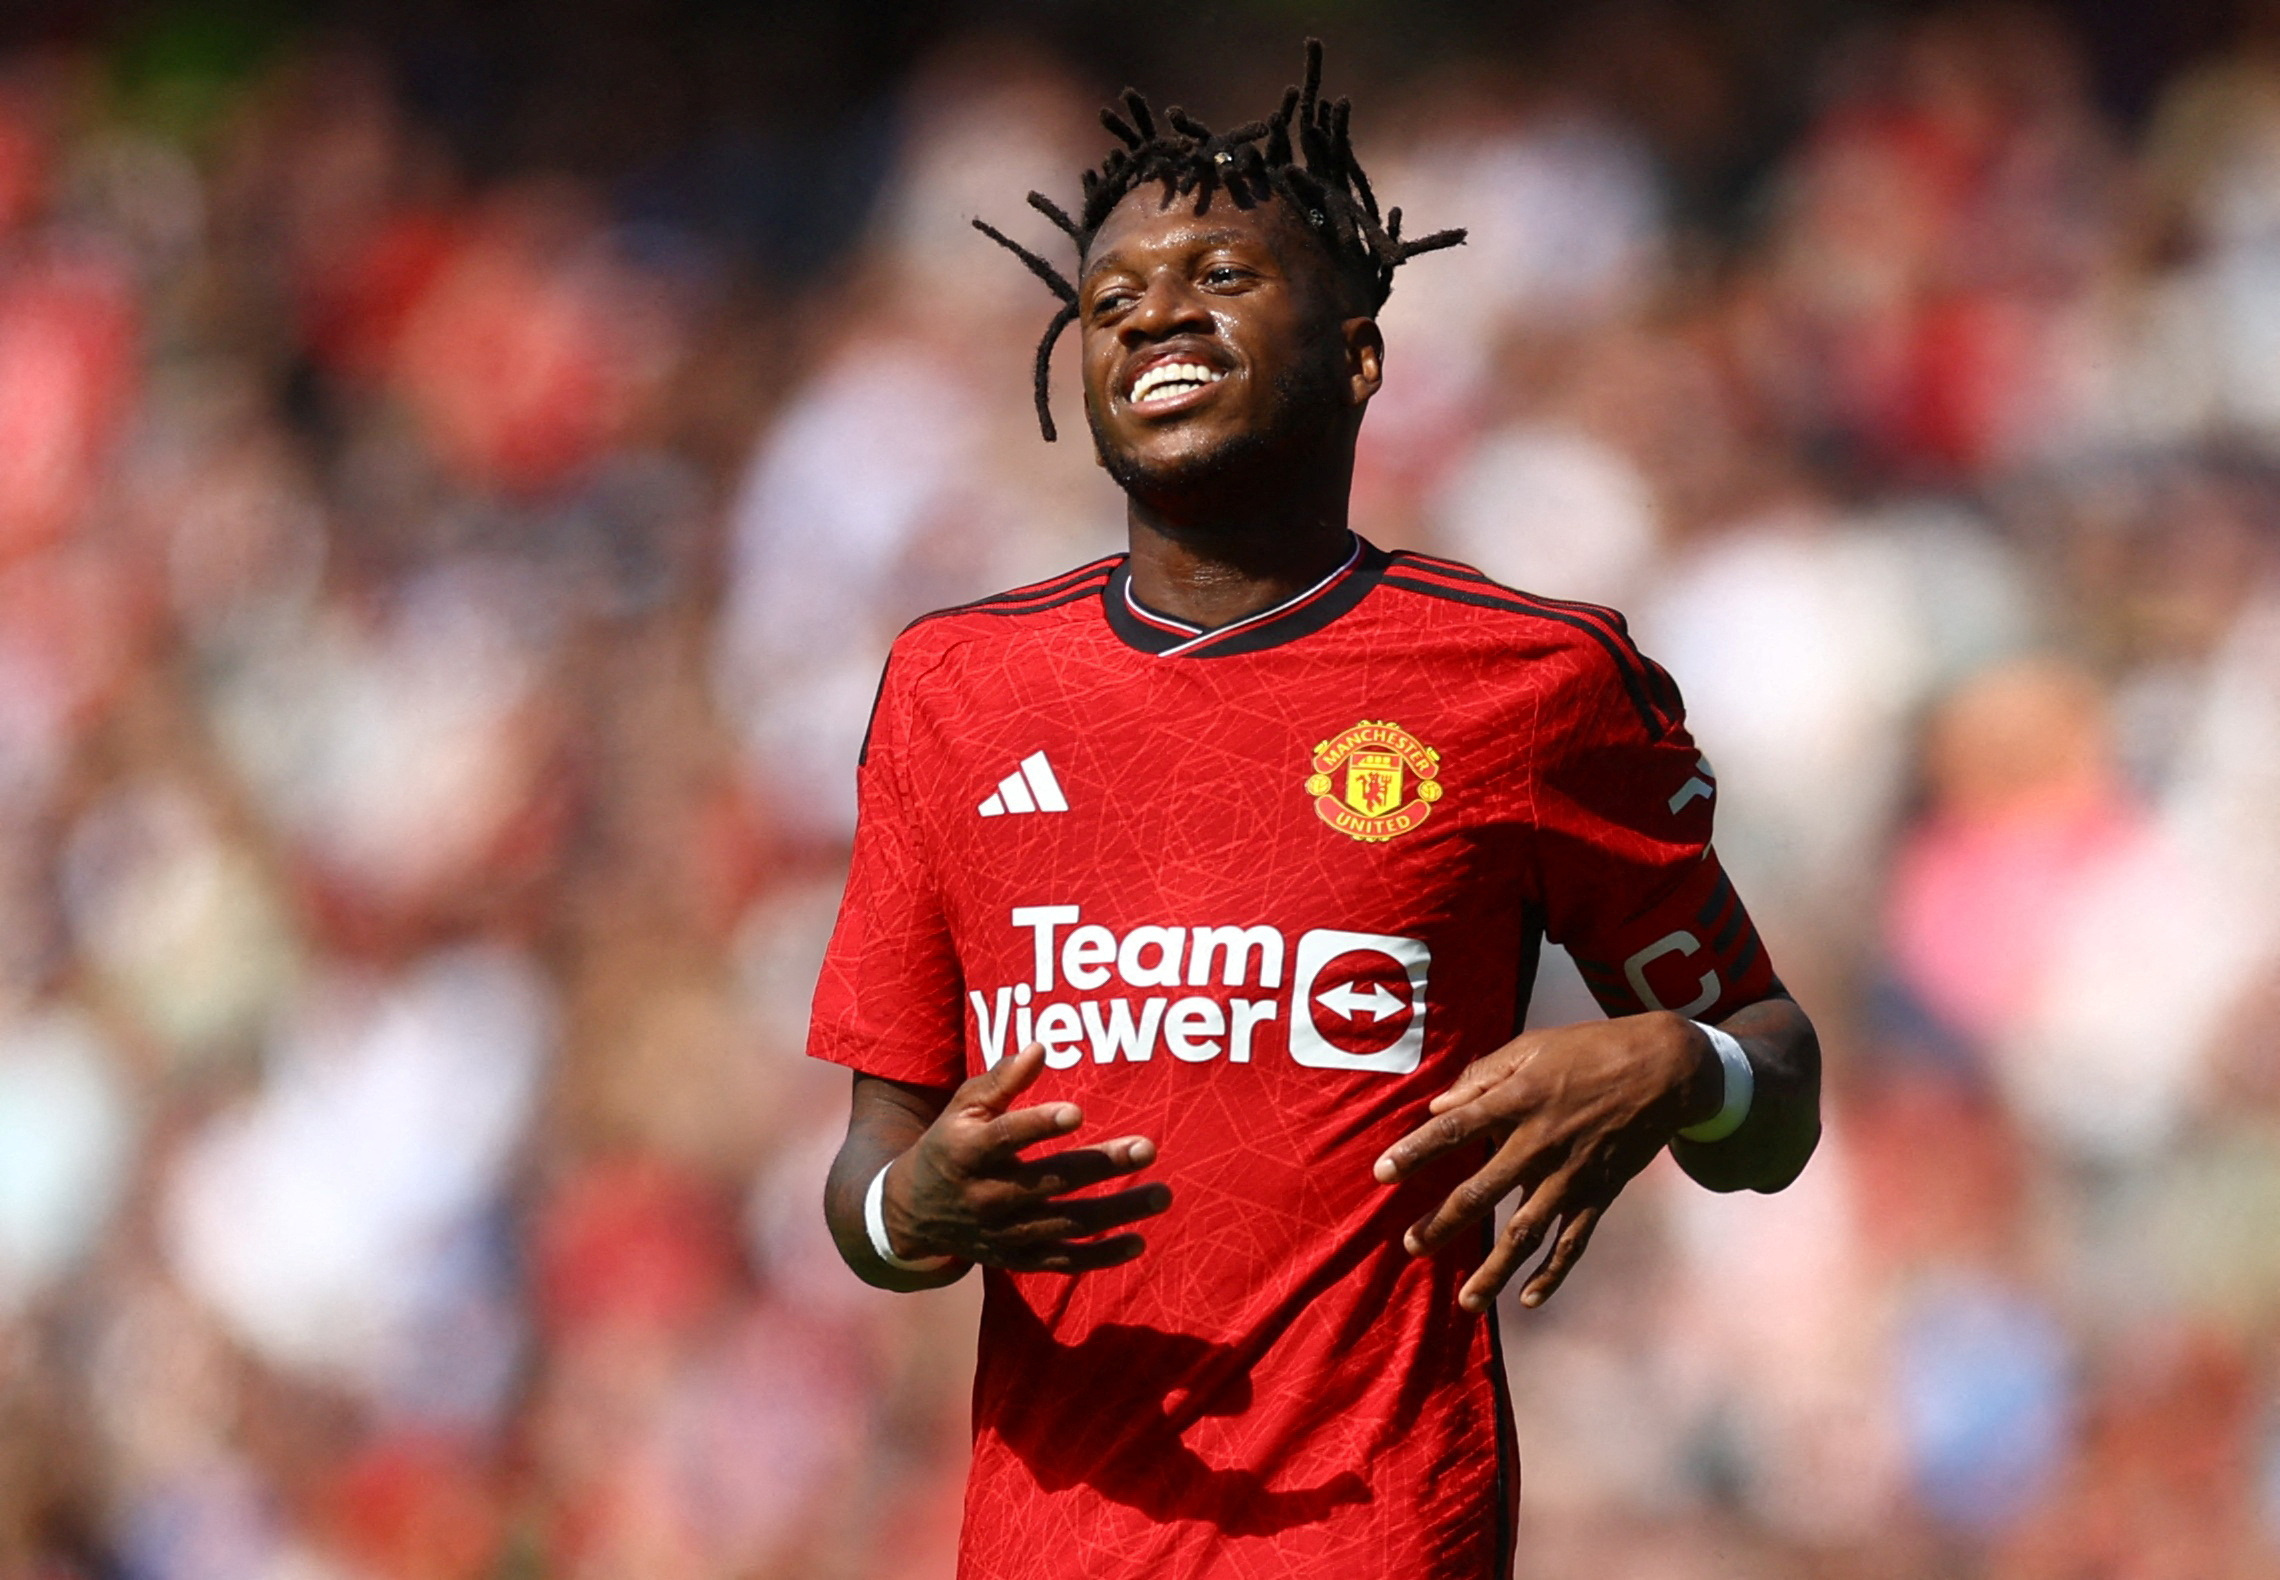 Man Utd agree deal to sell midfielder Fred to Fenerbahce | Reuters